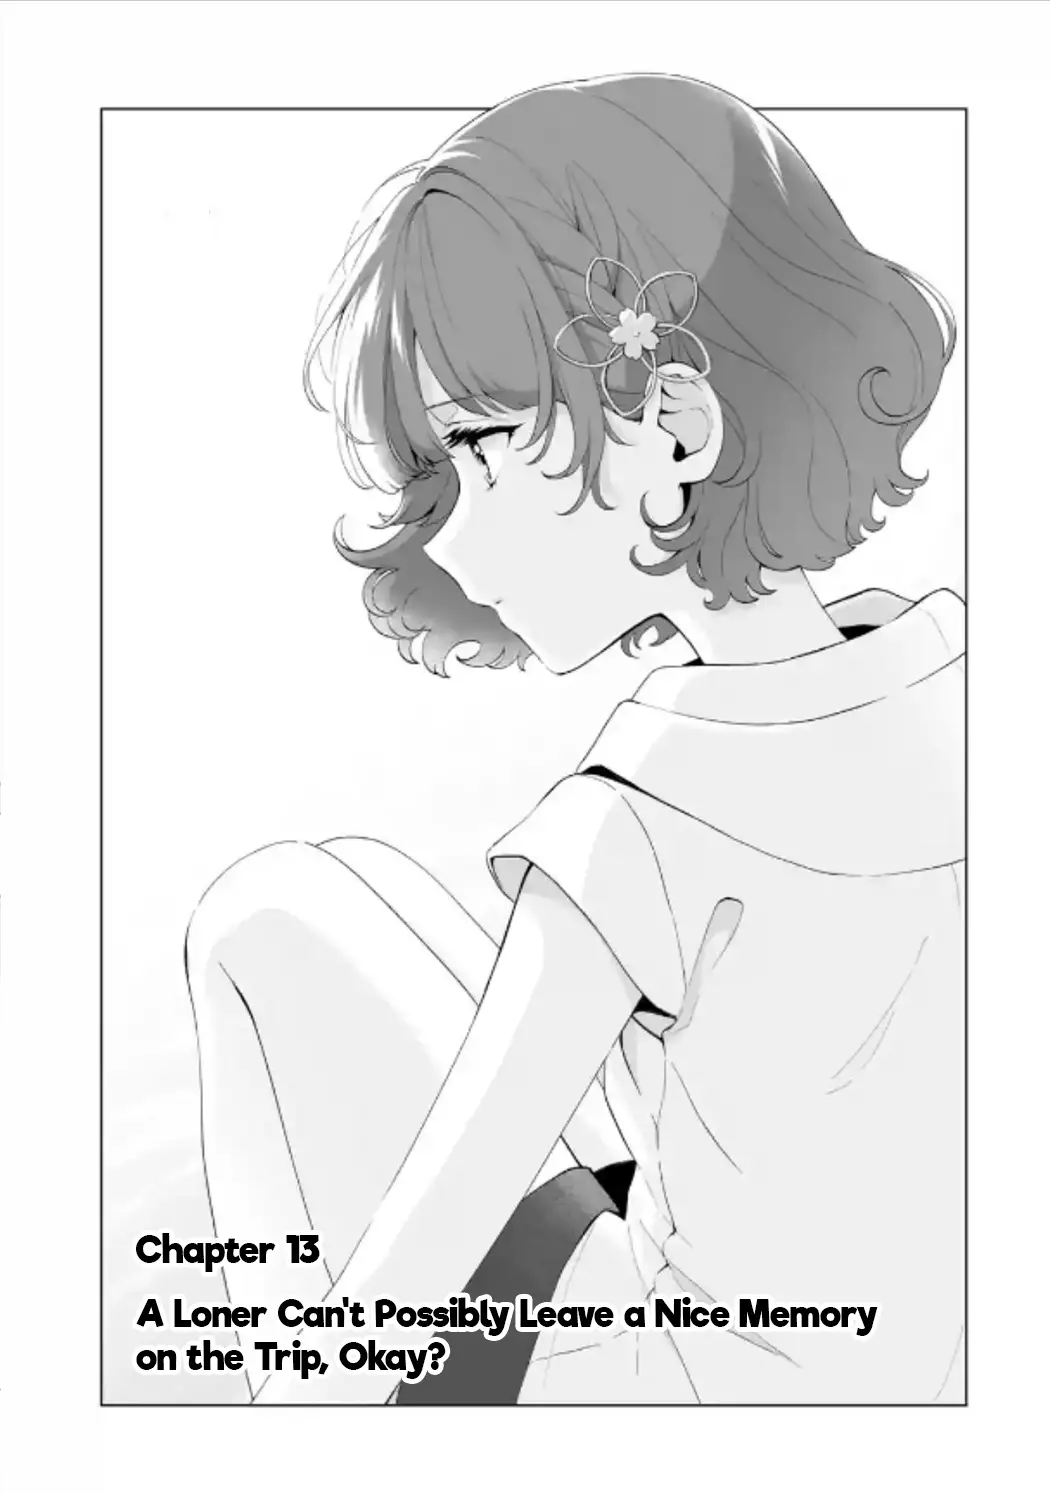 Please Leave Me Alone (For Some Reason, She Wants To Change A Lone Wolf's Helpless High School Life.) - 13 page 1-943bed6e